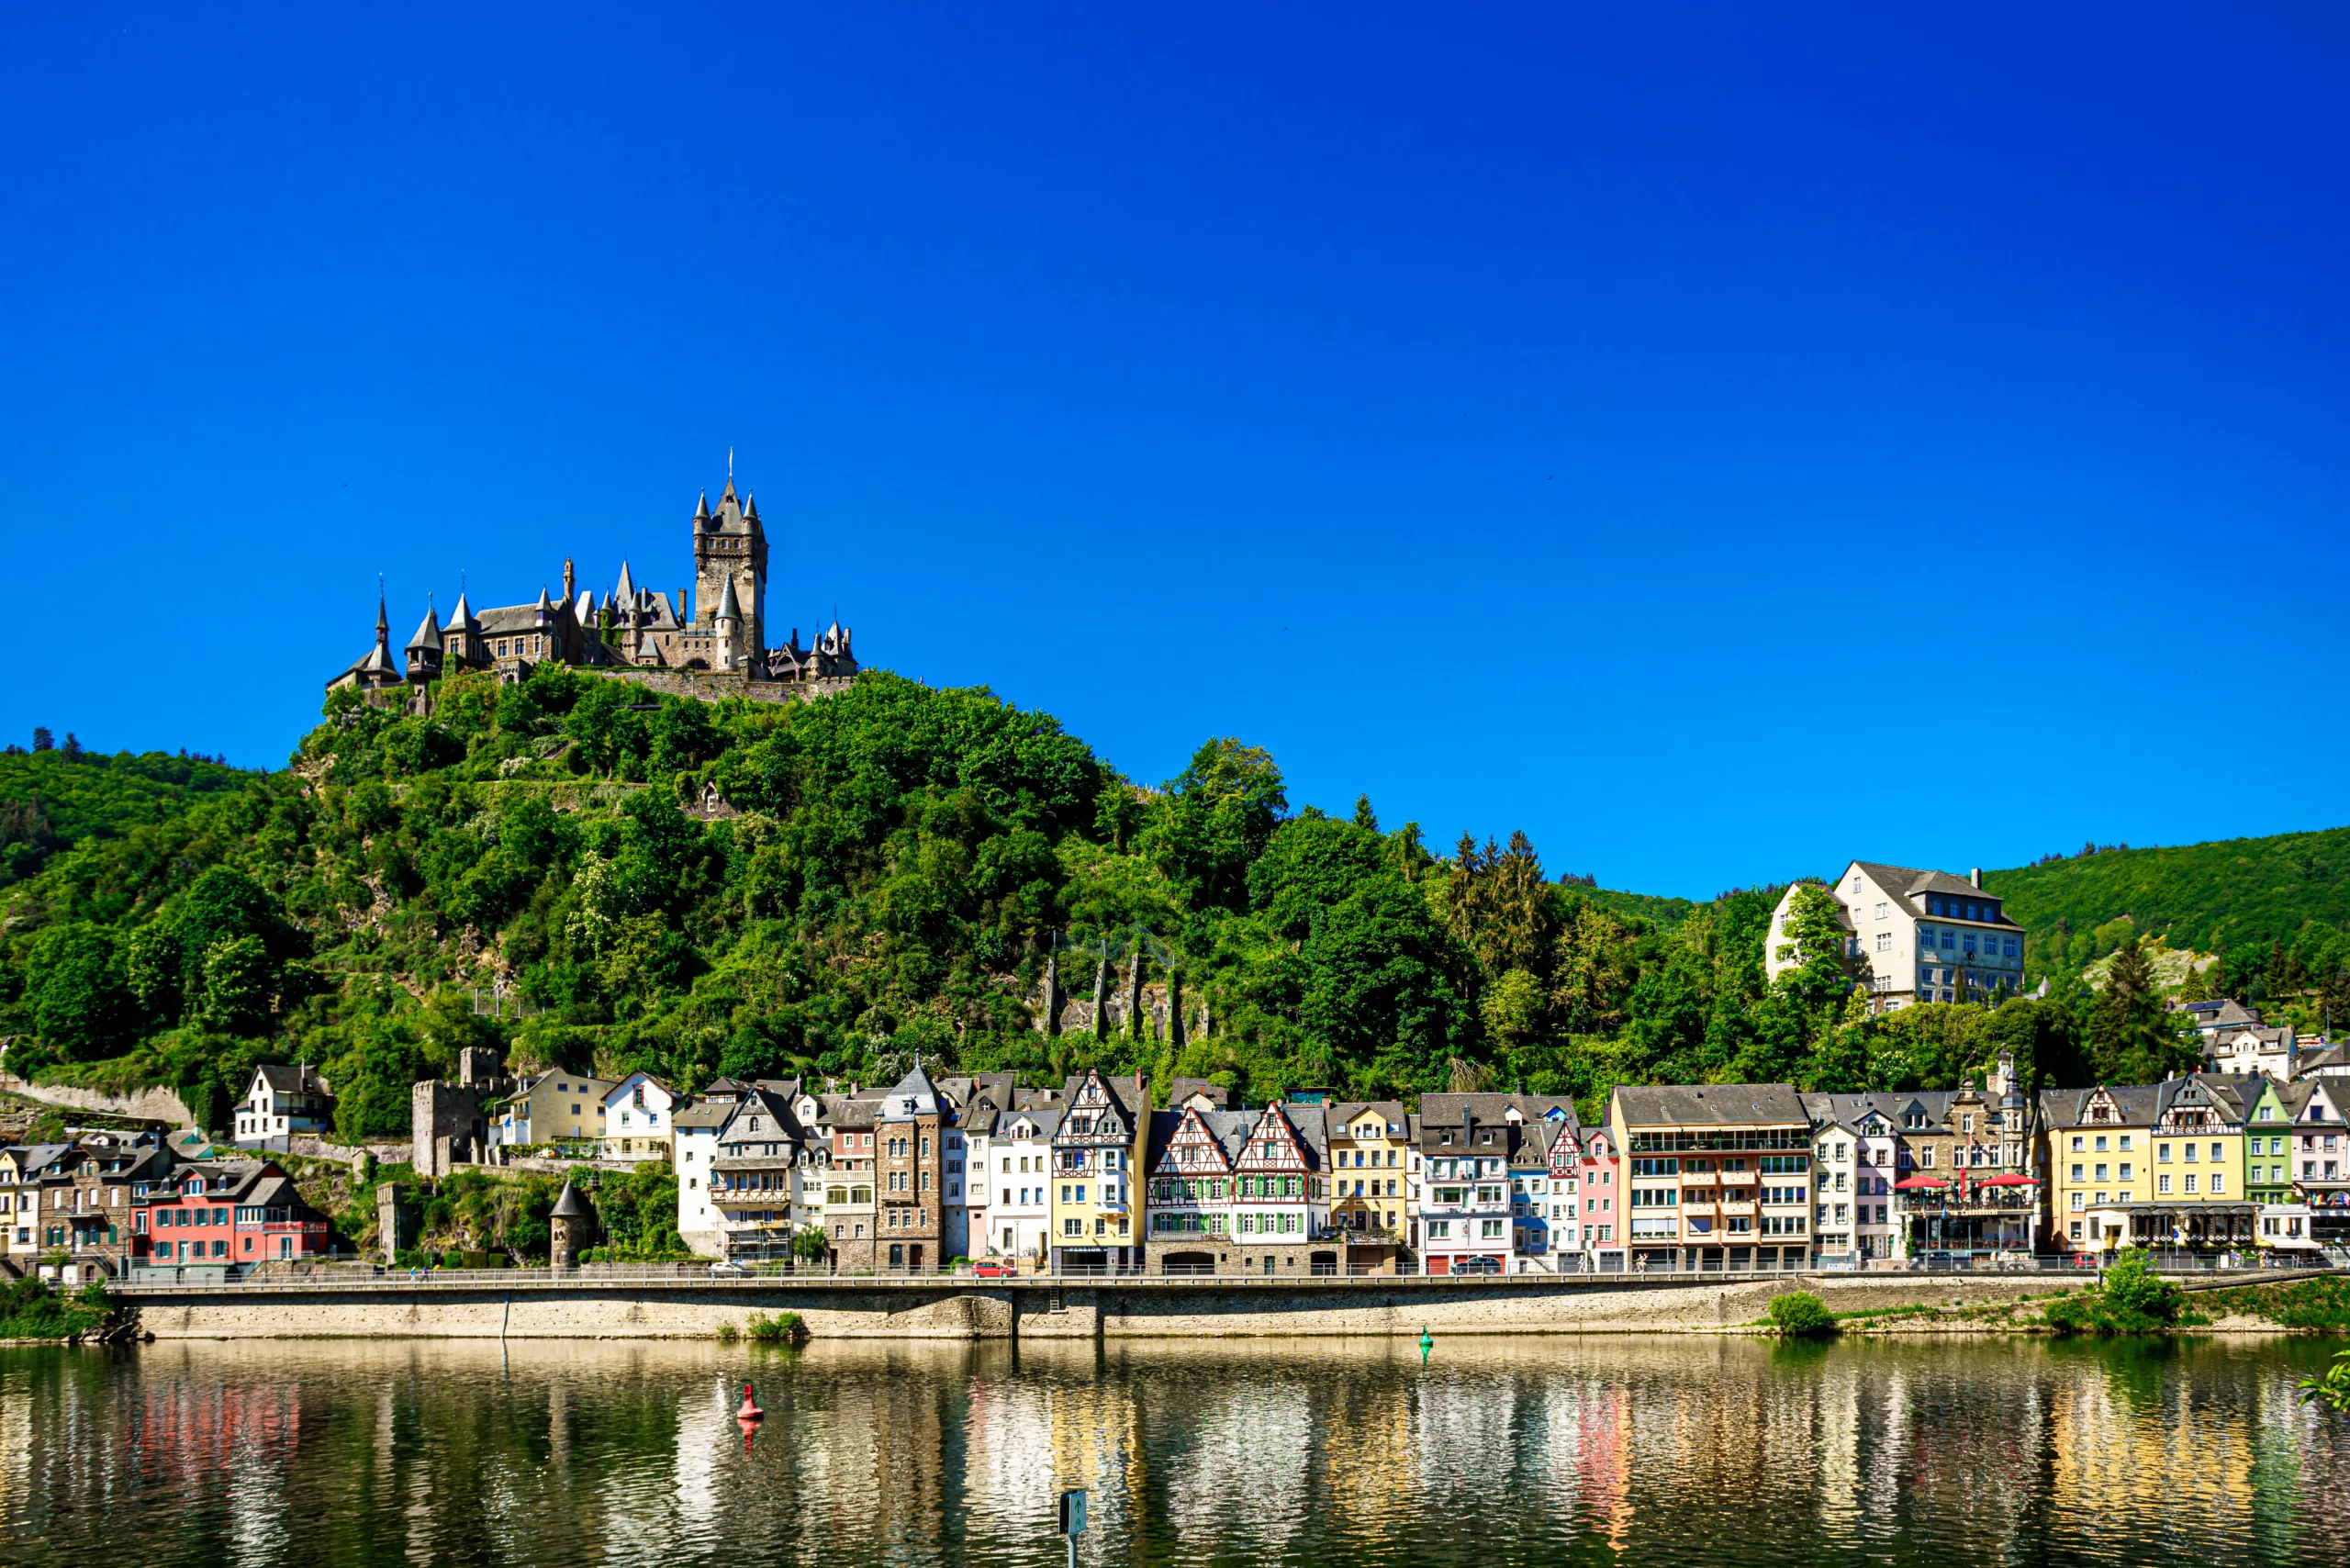 The beautiful town of Cochem, Germany with Reichsburg Cochem Castle looking over it.